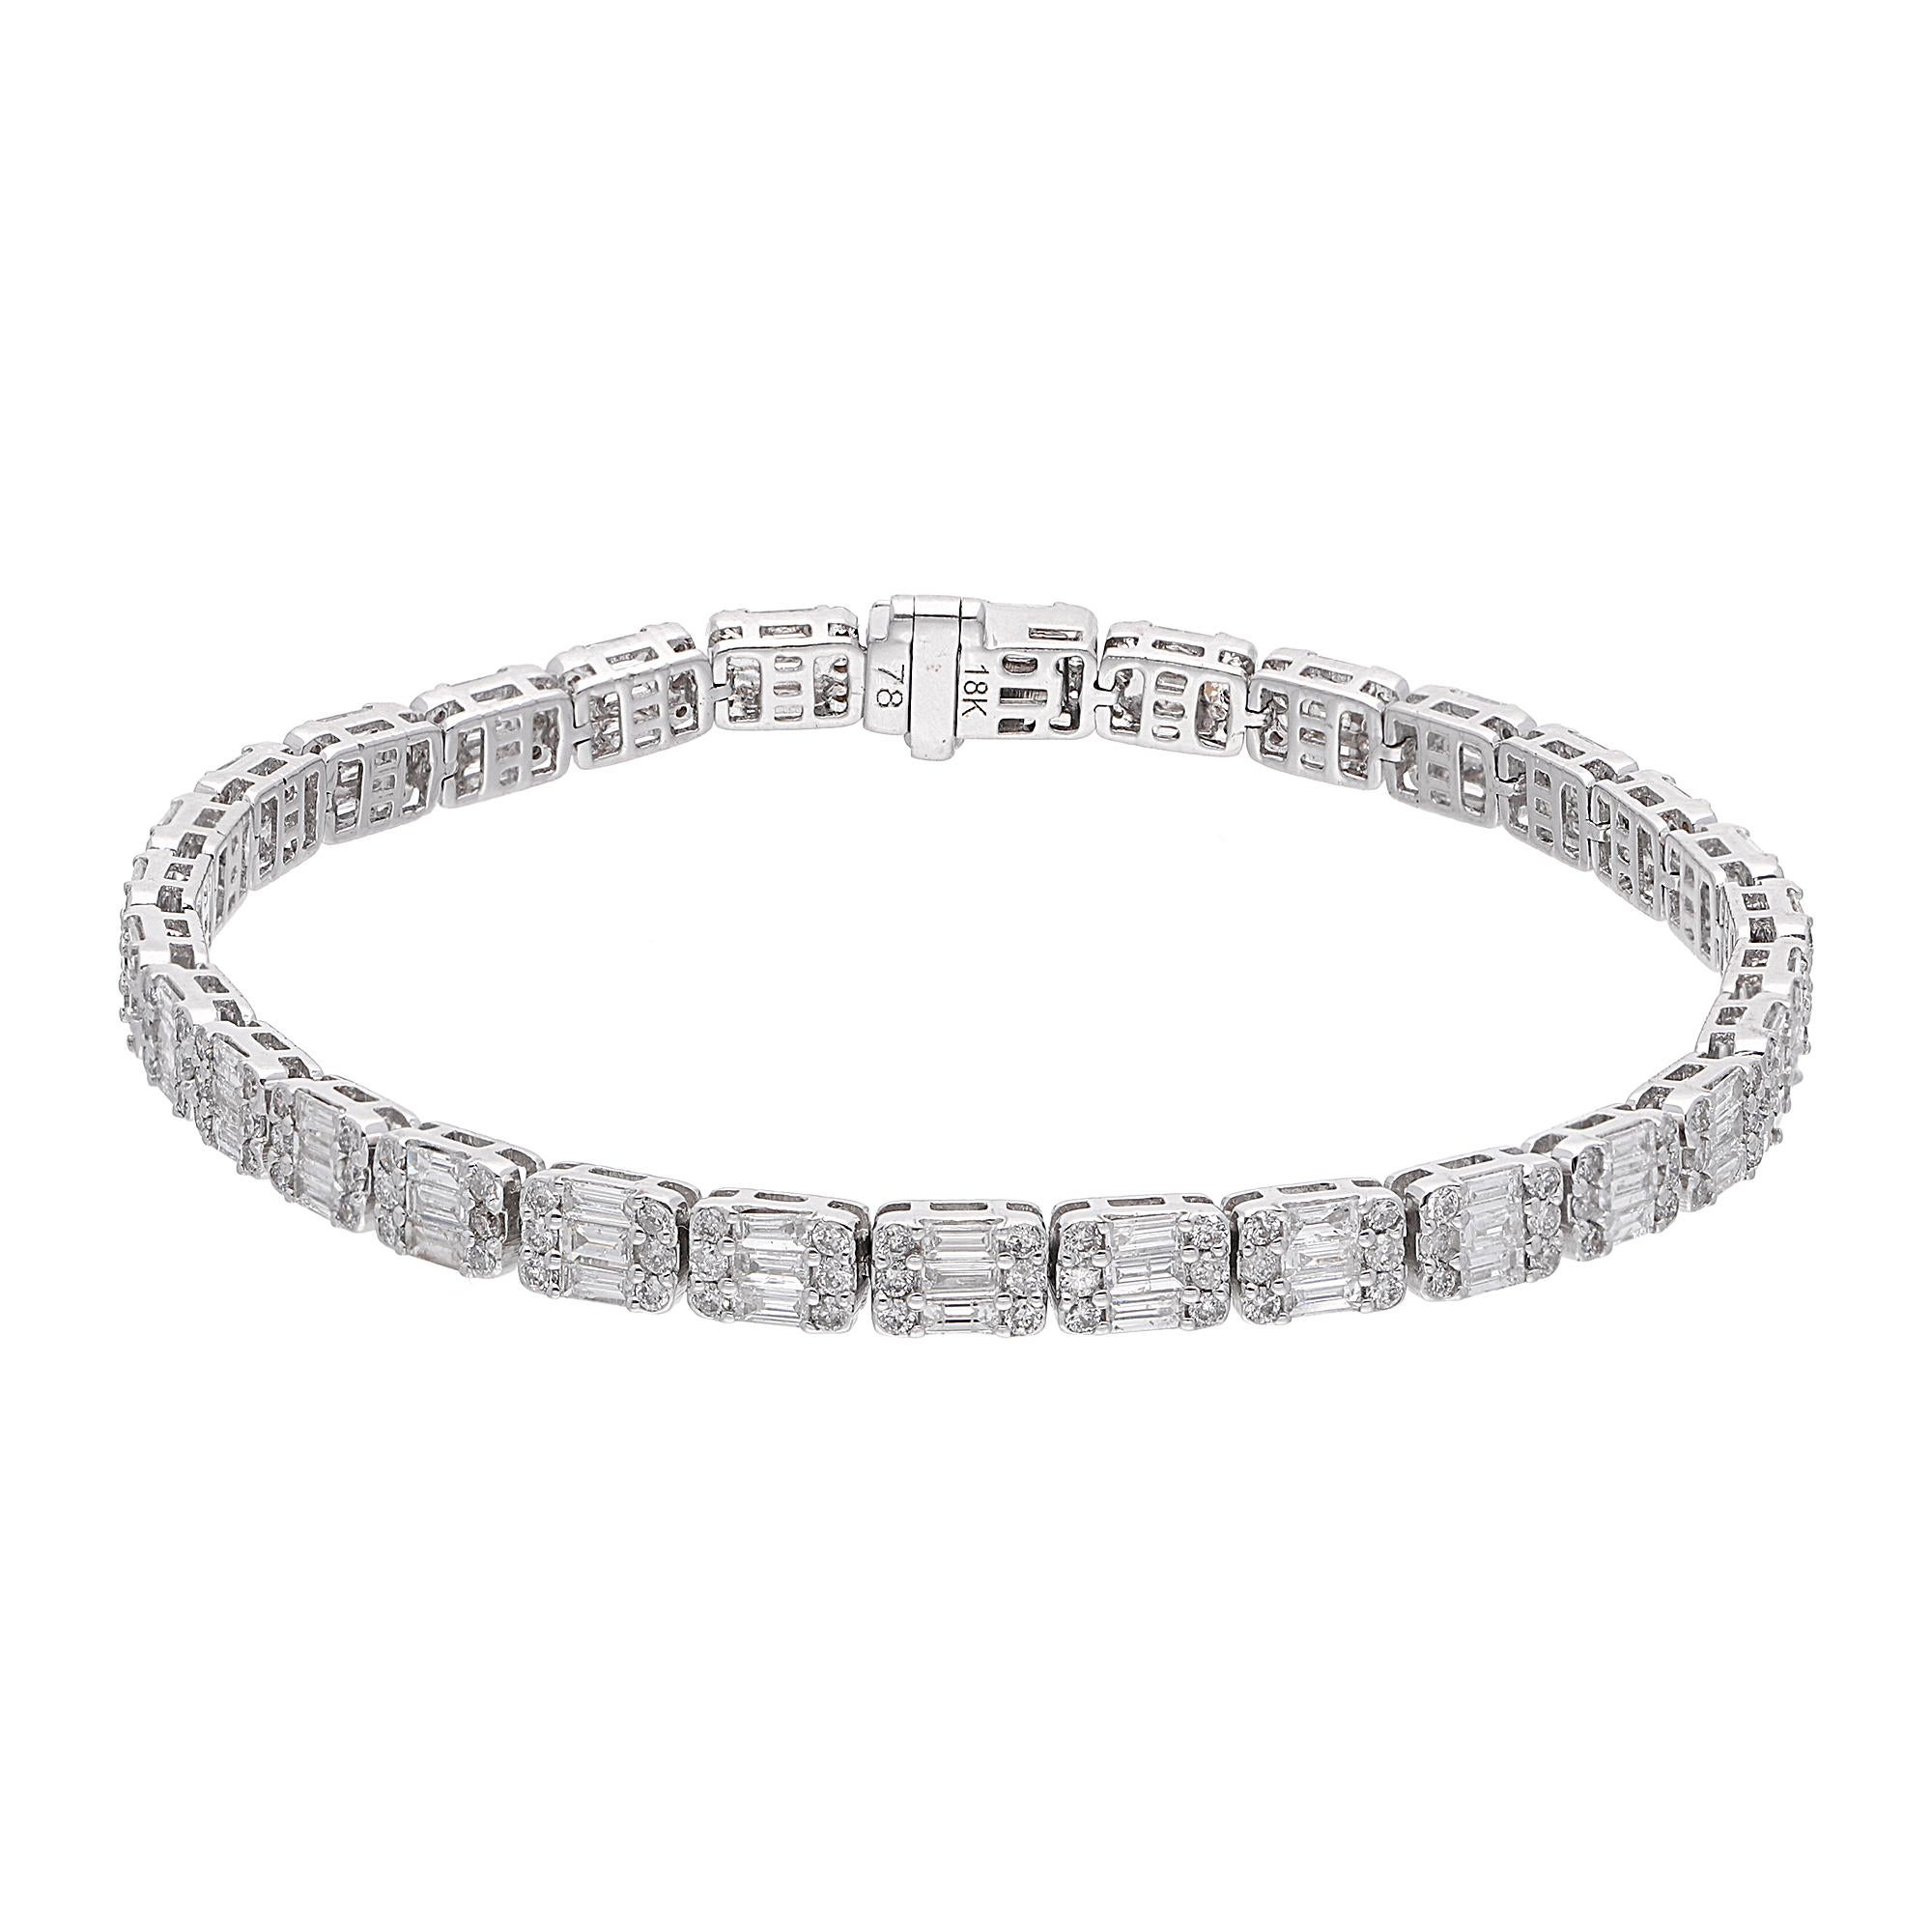 Item Code :- SEBR-42226 (14K)
Gross Wt. :- 13.56 gm
14k Solid White Gold Wt. :- 12.30 gm
Natural Diamond Wt. :- 6.30 Ct. ( AVERAGE DIAMOND CLARITY SI1-SI2 & COLOR H-I )
Bracelet Length :- 7 Inches Long

✦ Sizing
.....................
We can adjust